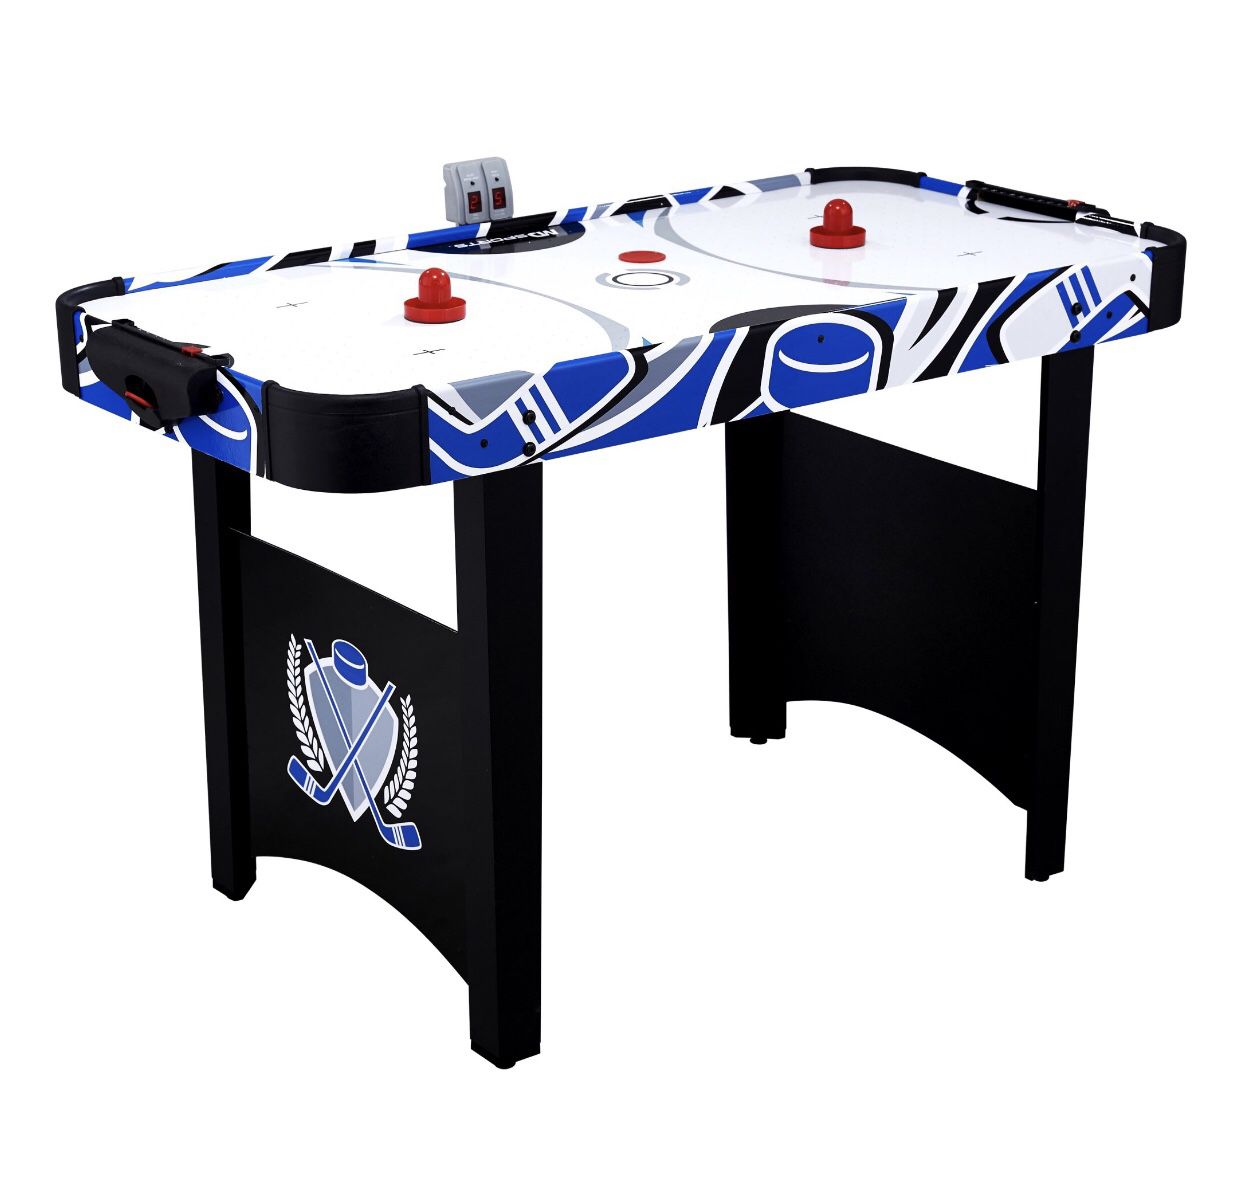 MD Sports 48 Inch Air Powered Hockey Table